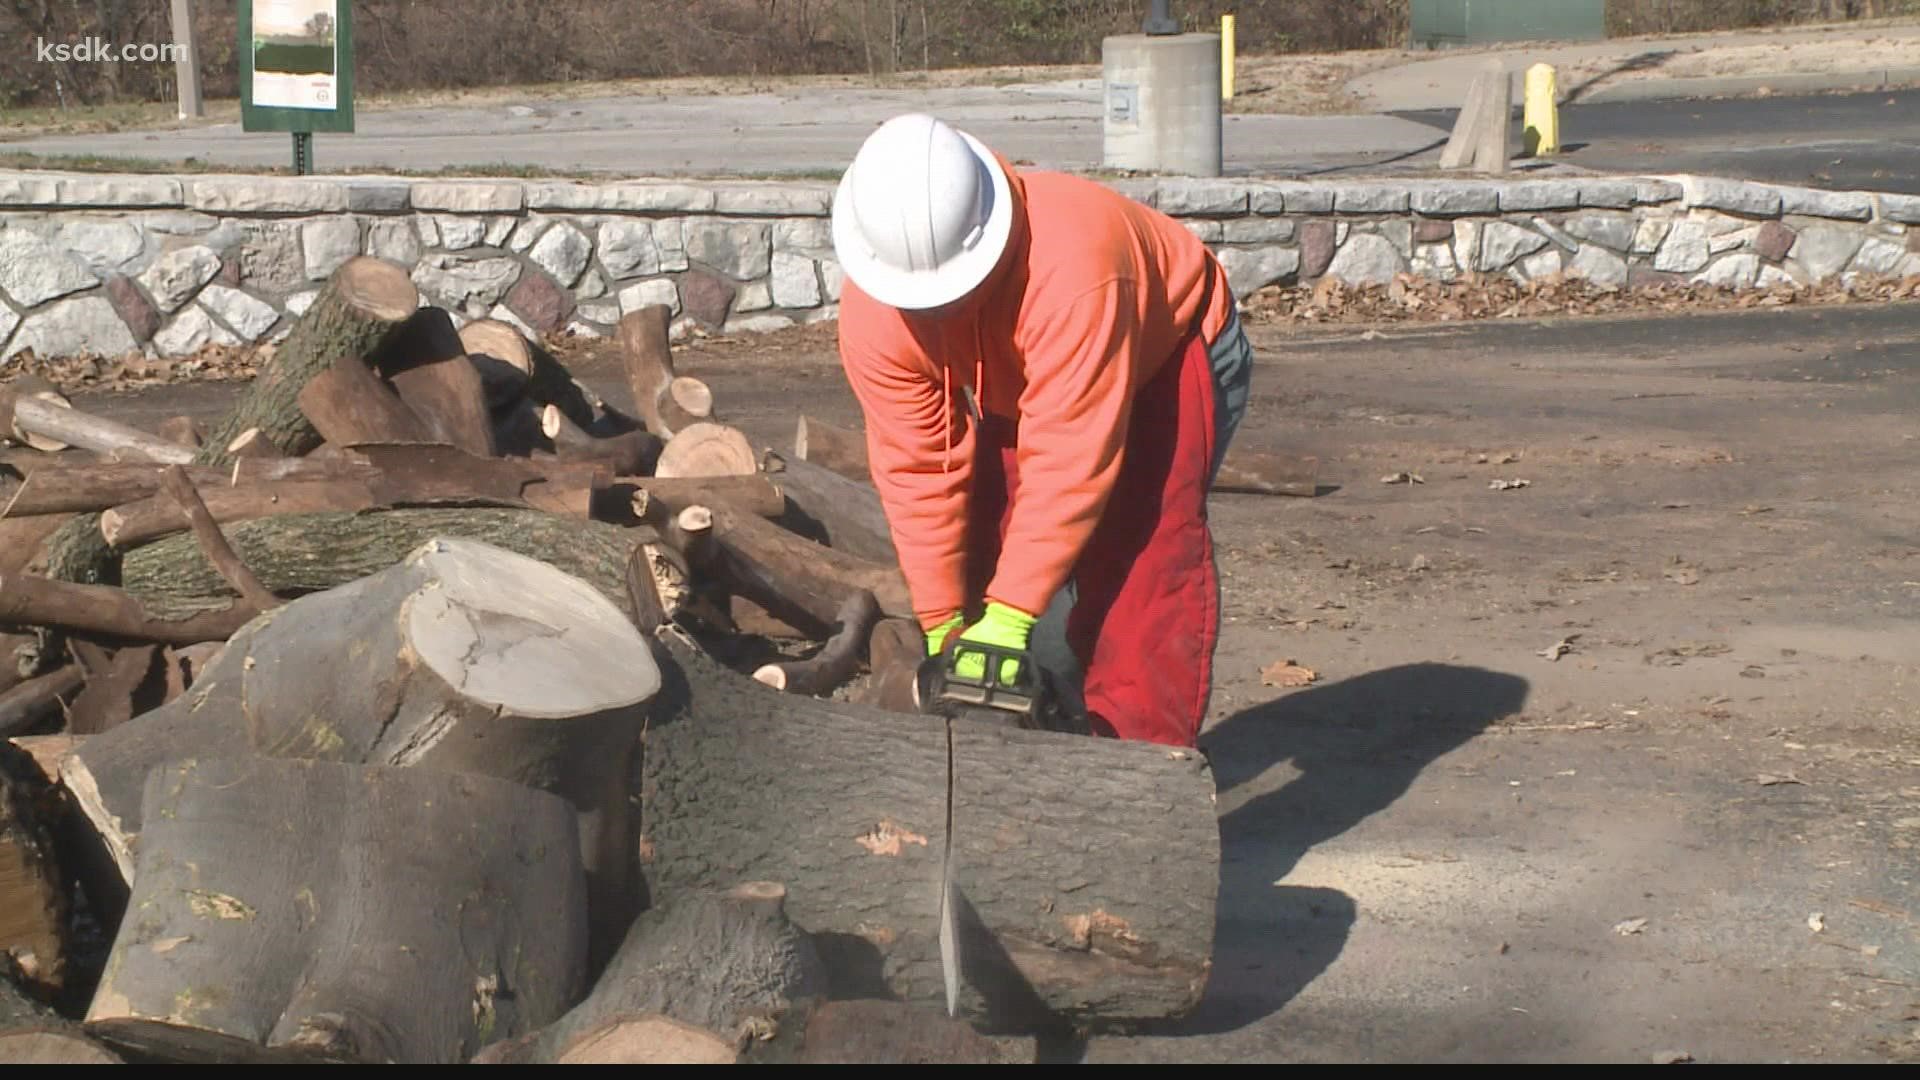 Do you need firewood? The City of St. Louis Department of Parks, Recreation and Forestry is now offering free firewood to city residents.